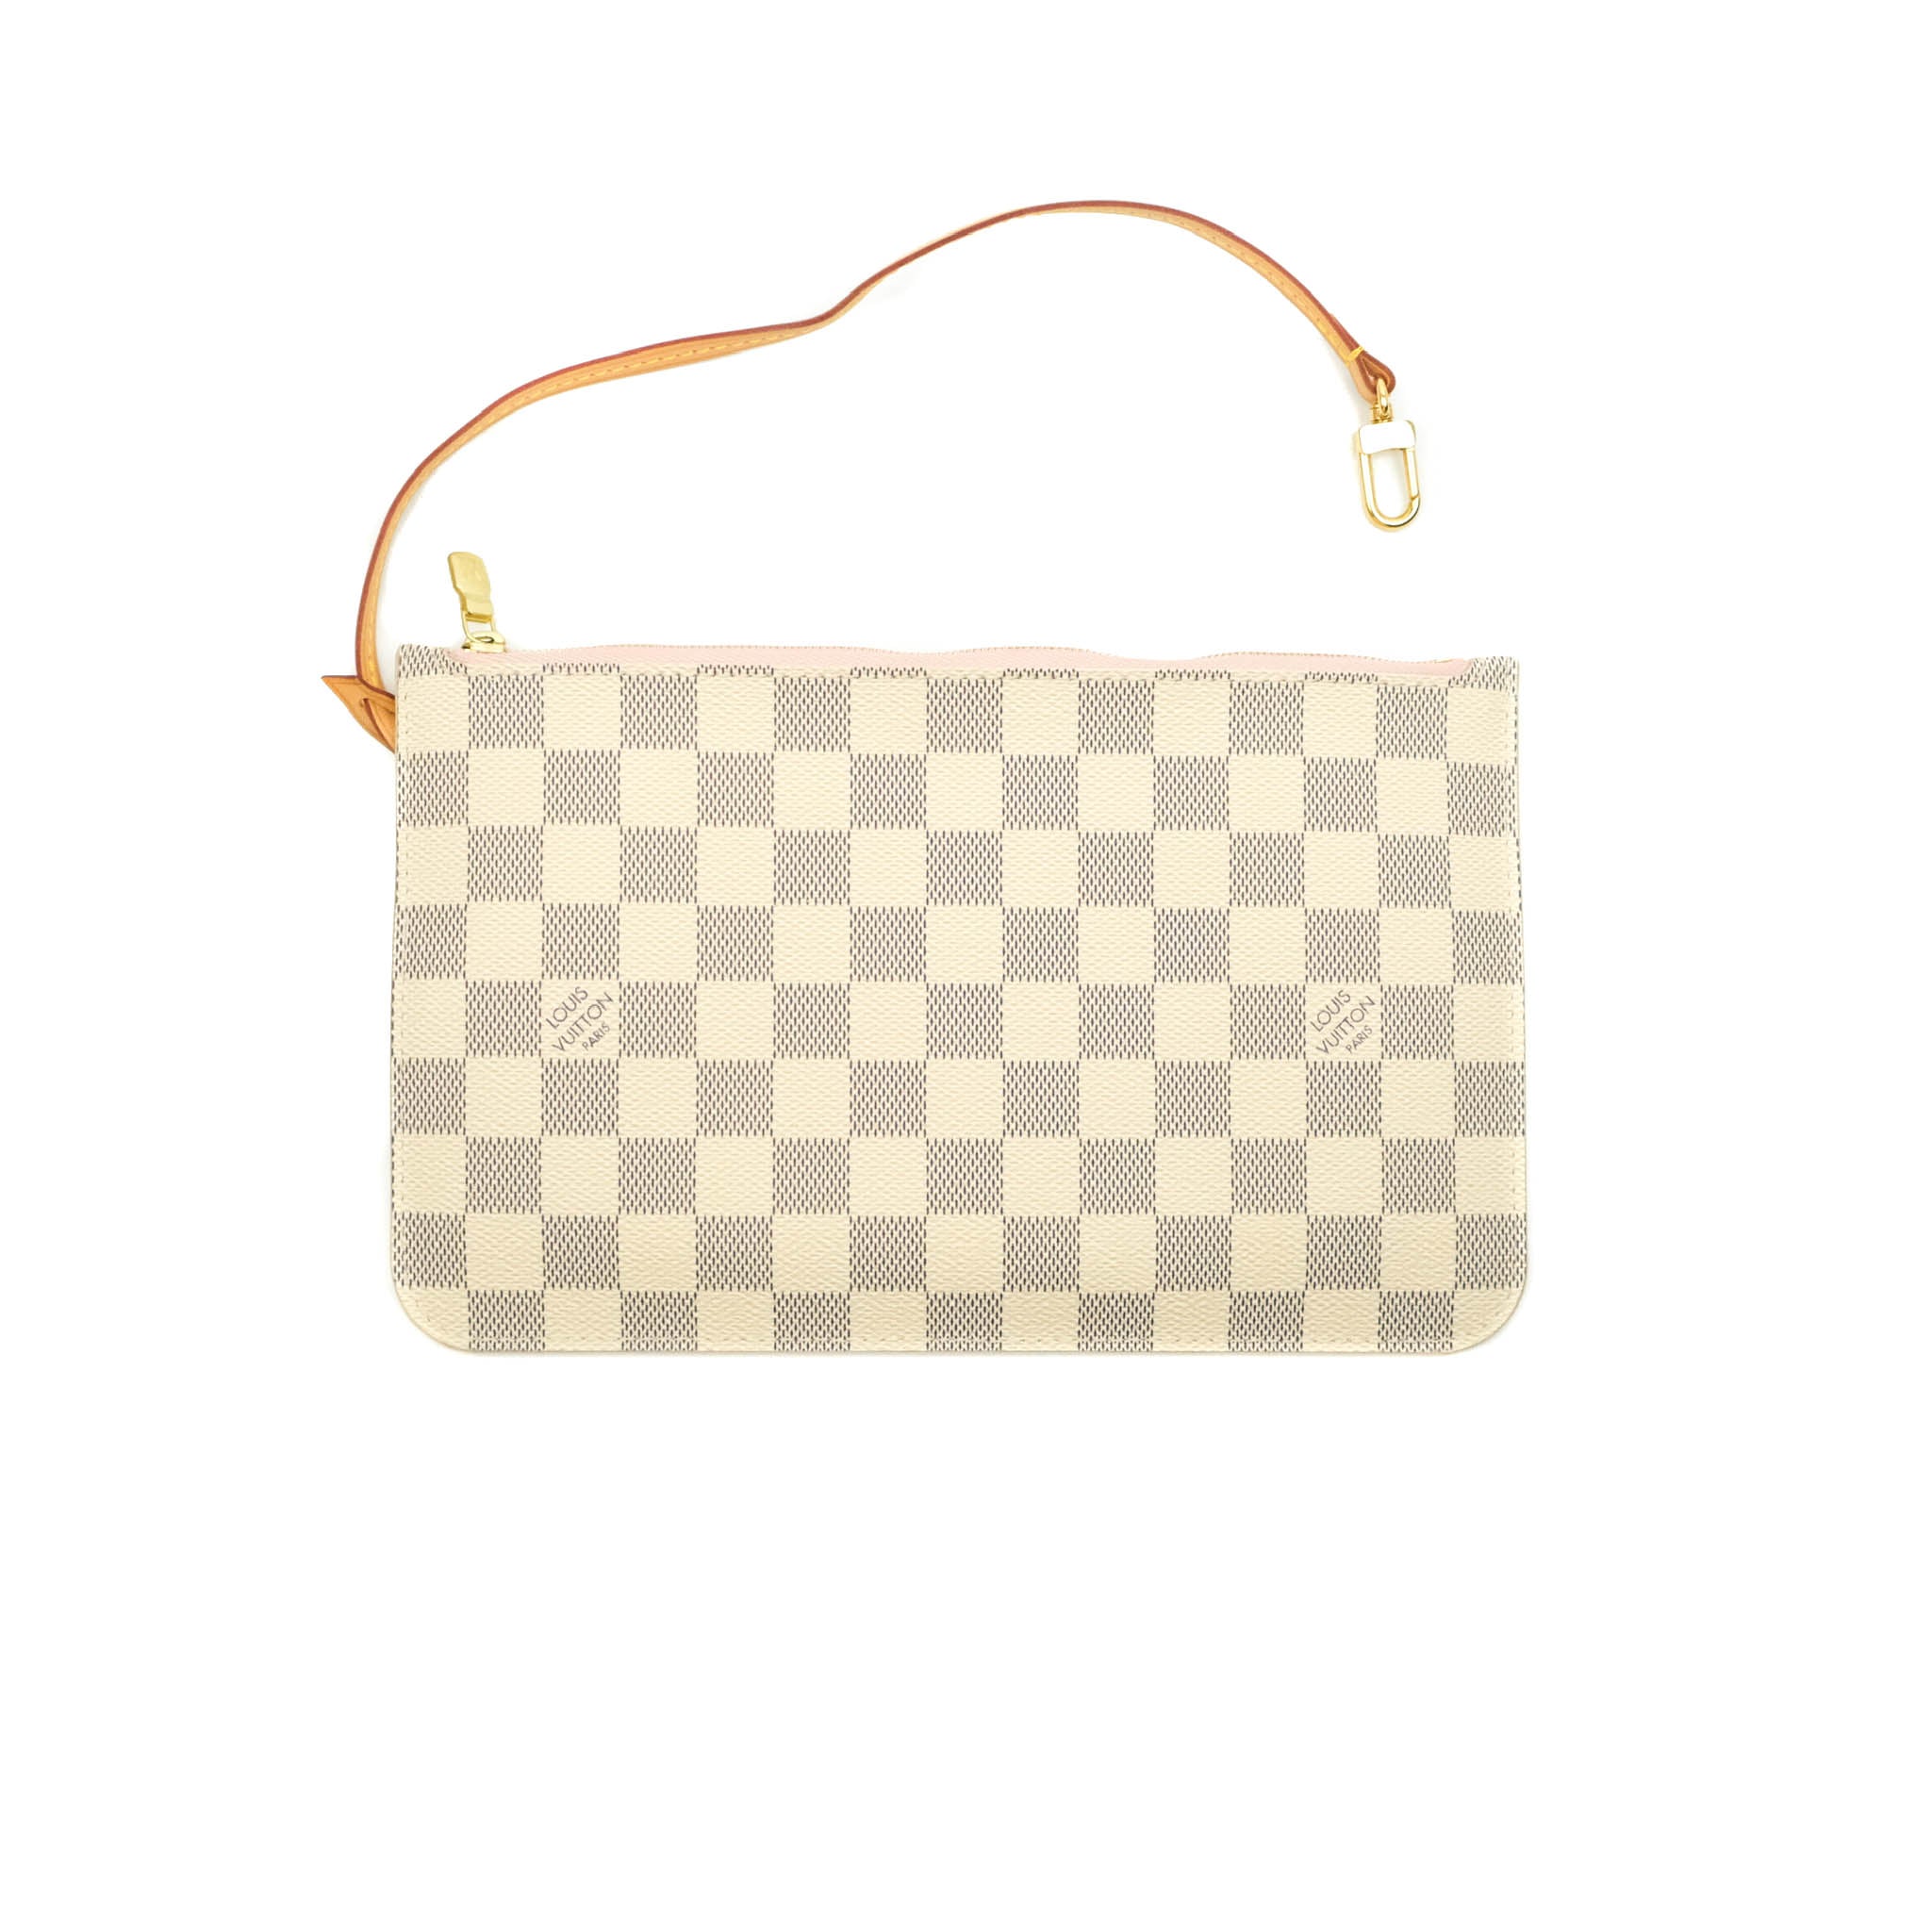 Louis Vuitton Neverfull MM Damier Azur Canvas Tote Bag – Coco Approved  Studio